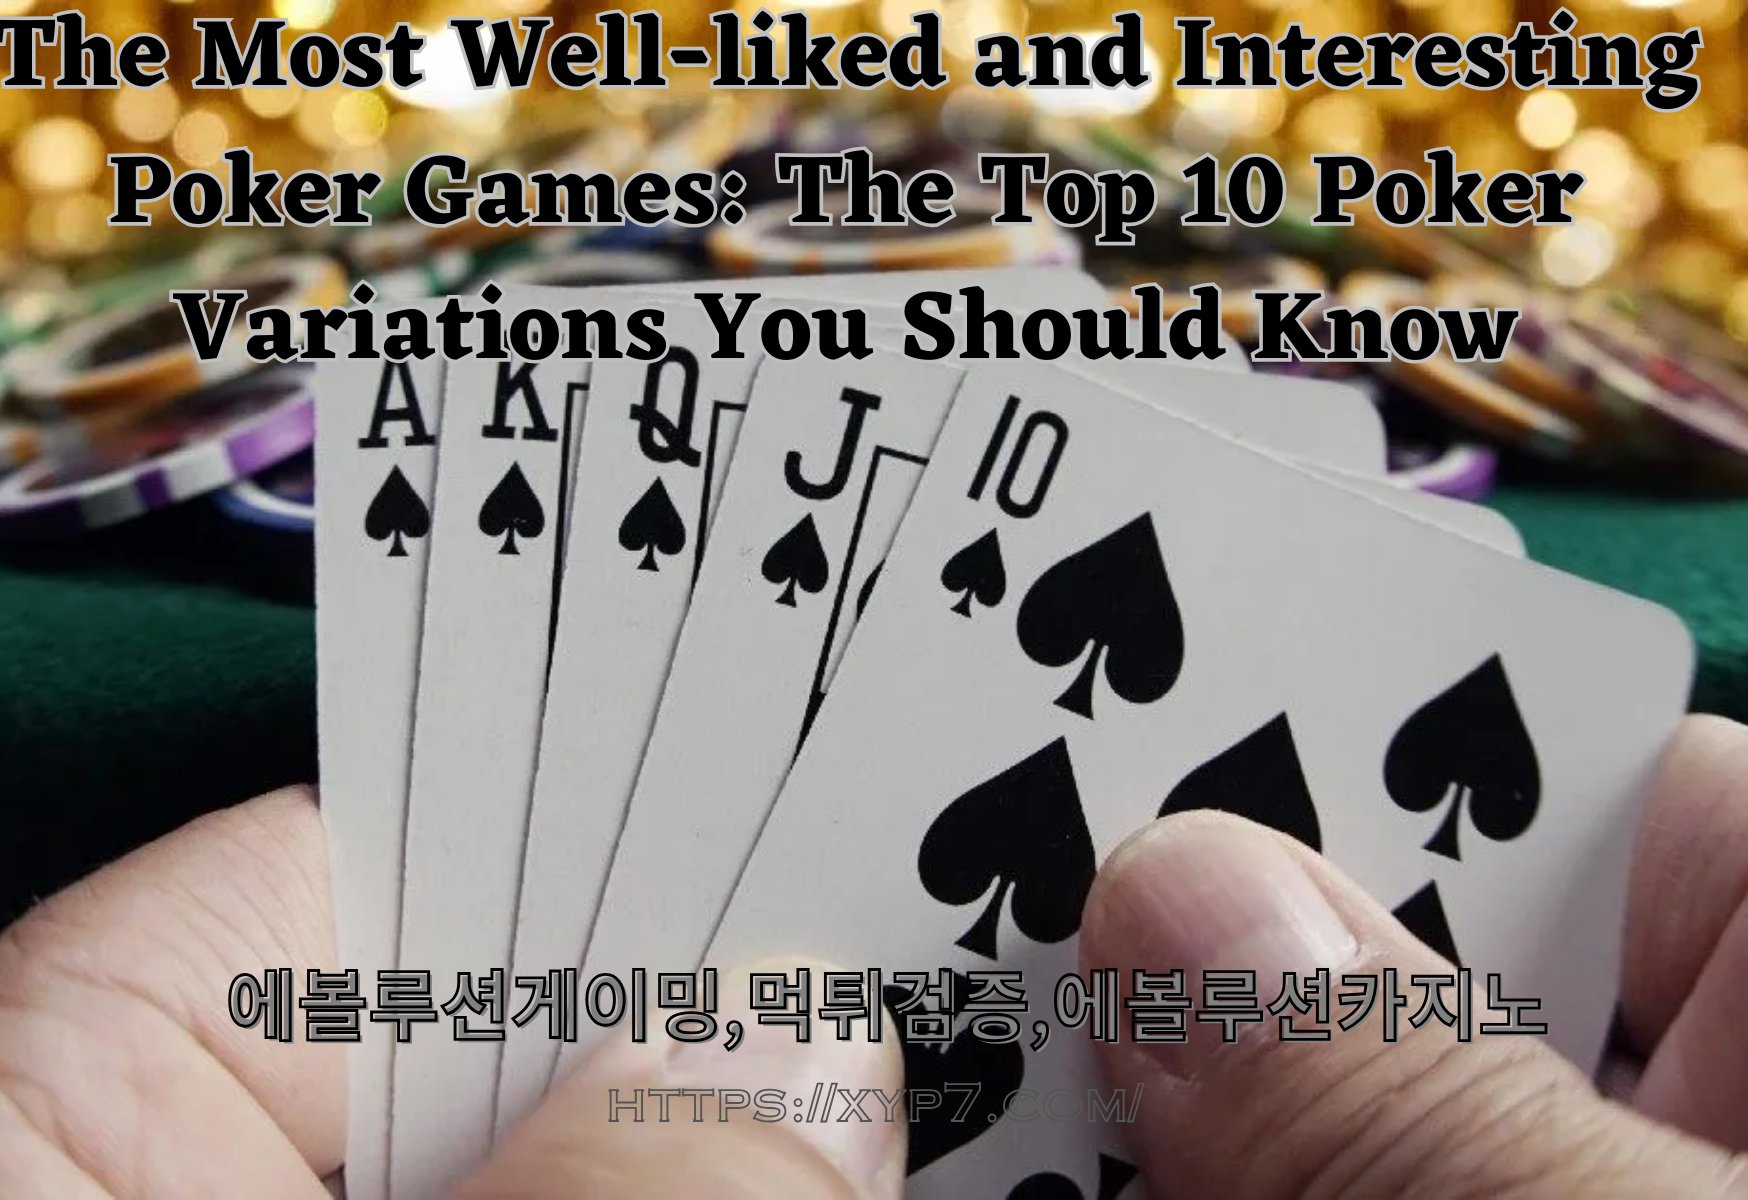 The Most Well-liked and Interesting Poker Games: